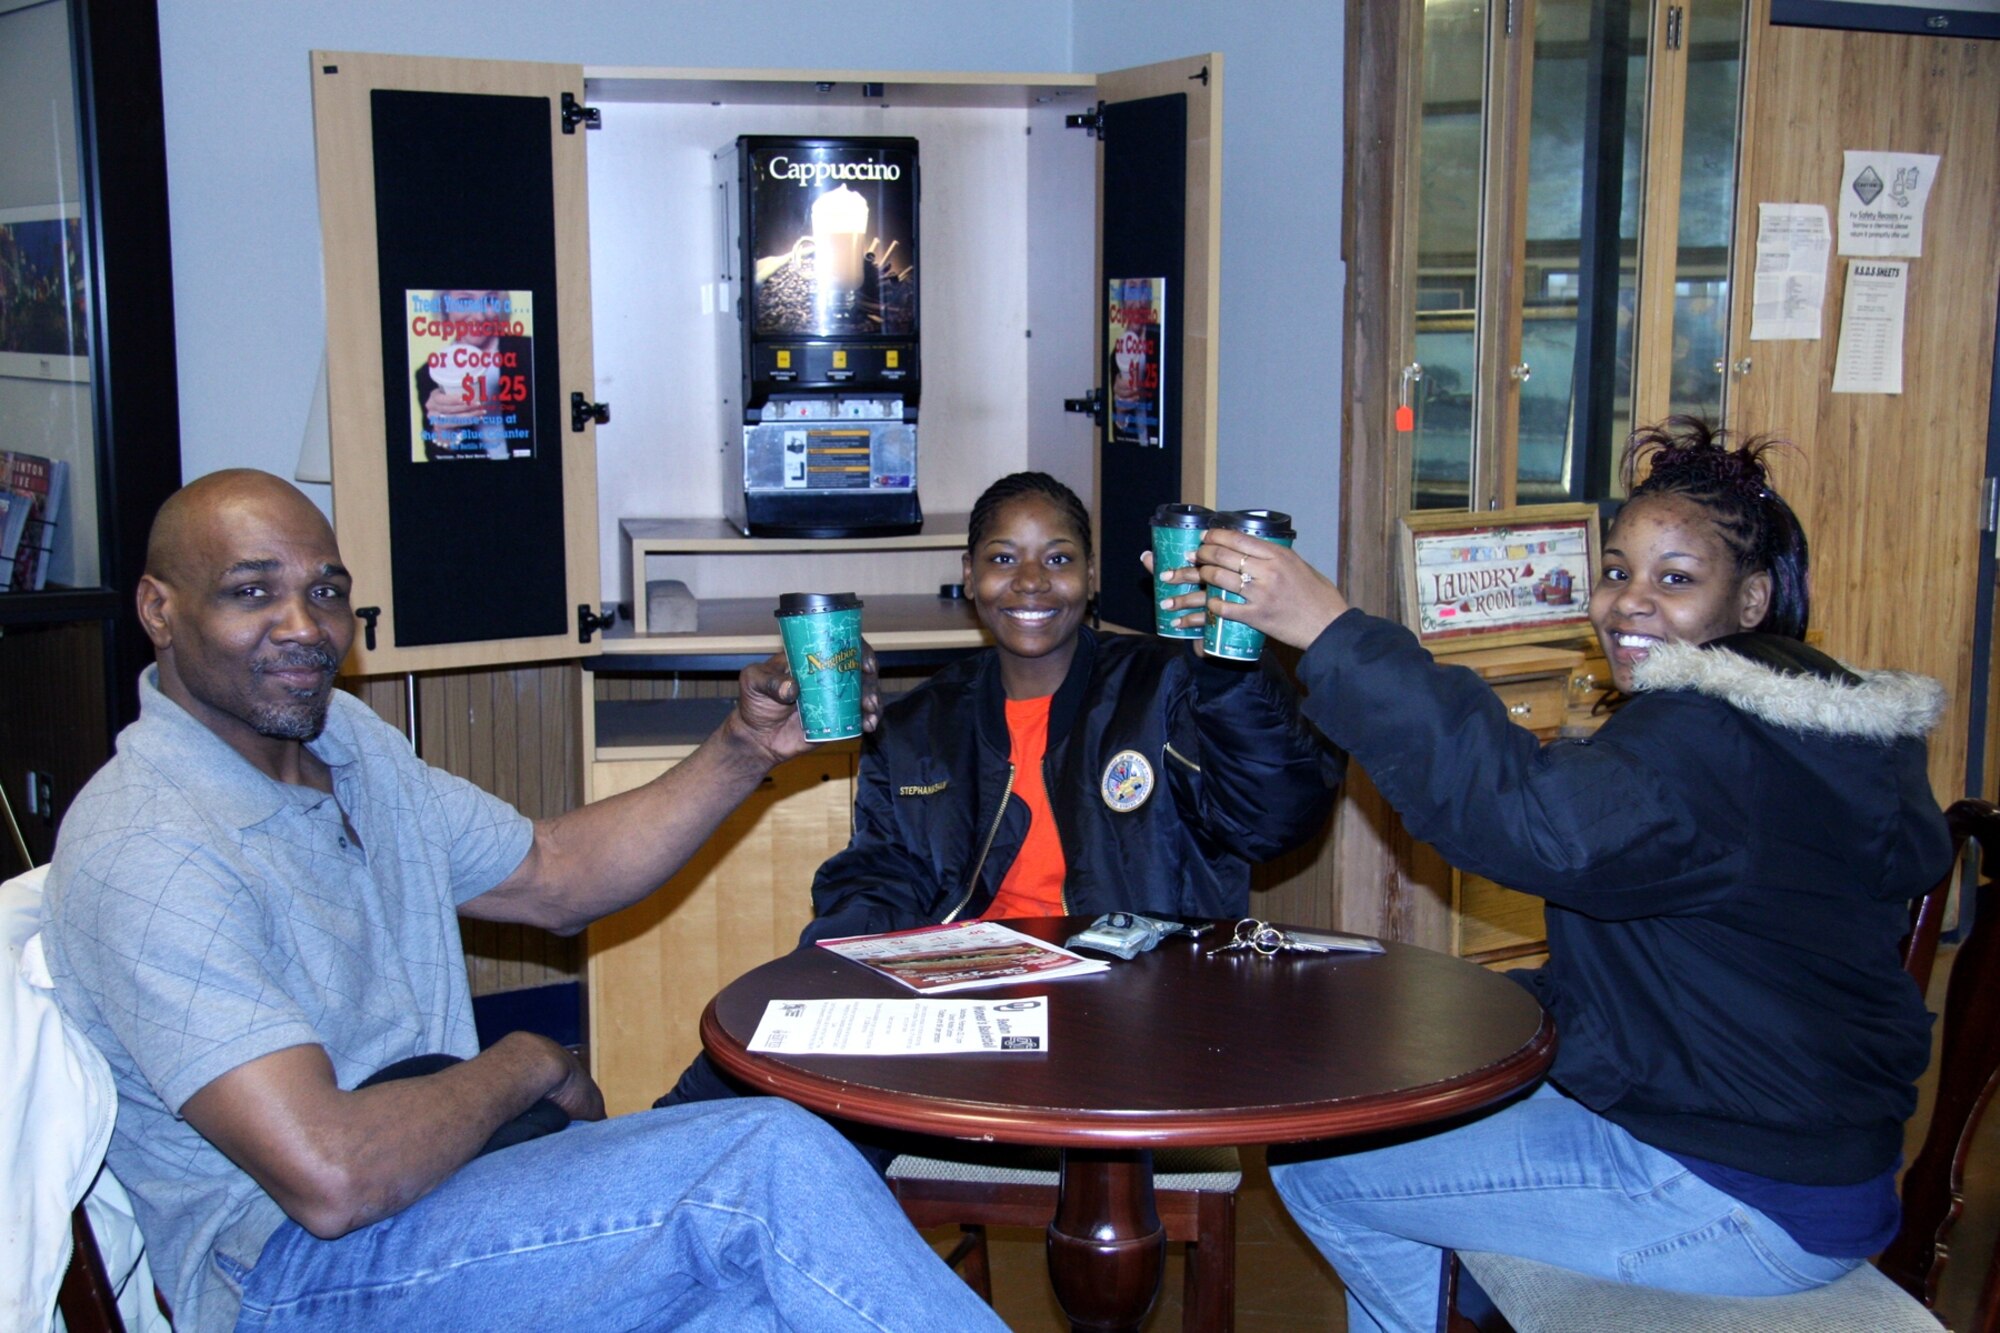 Madarry Smiley, Kimberly Shaw and Stephanie Shaw enjoy a hot cappuccino at the Services Mall, Bldg. 478, on a cold January morning.  The new cappuccino service allows patrons to relax and enjoy their mall visit.  A 16-ounce cup can be purchased at the big blue counter for $1.25.